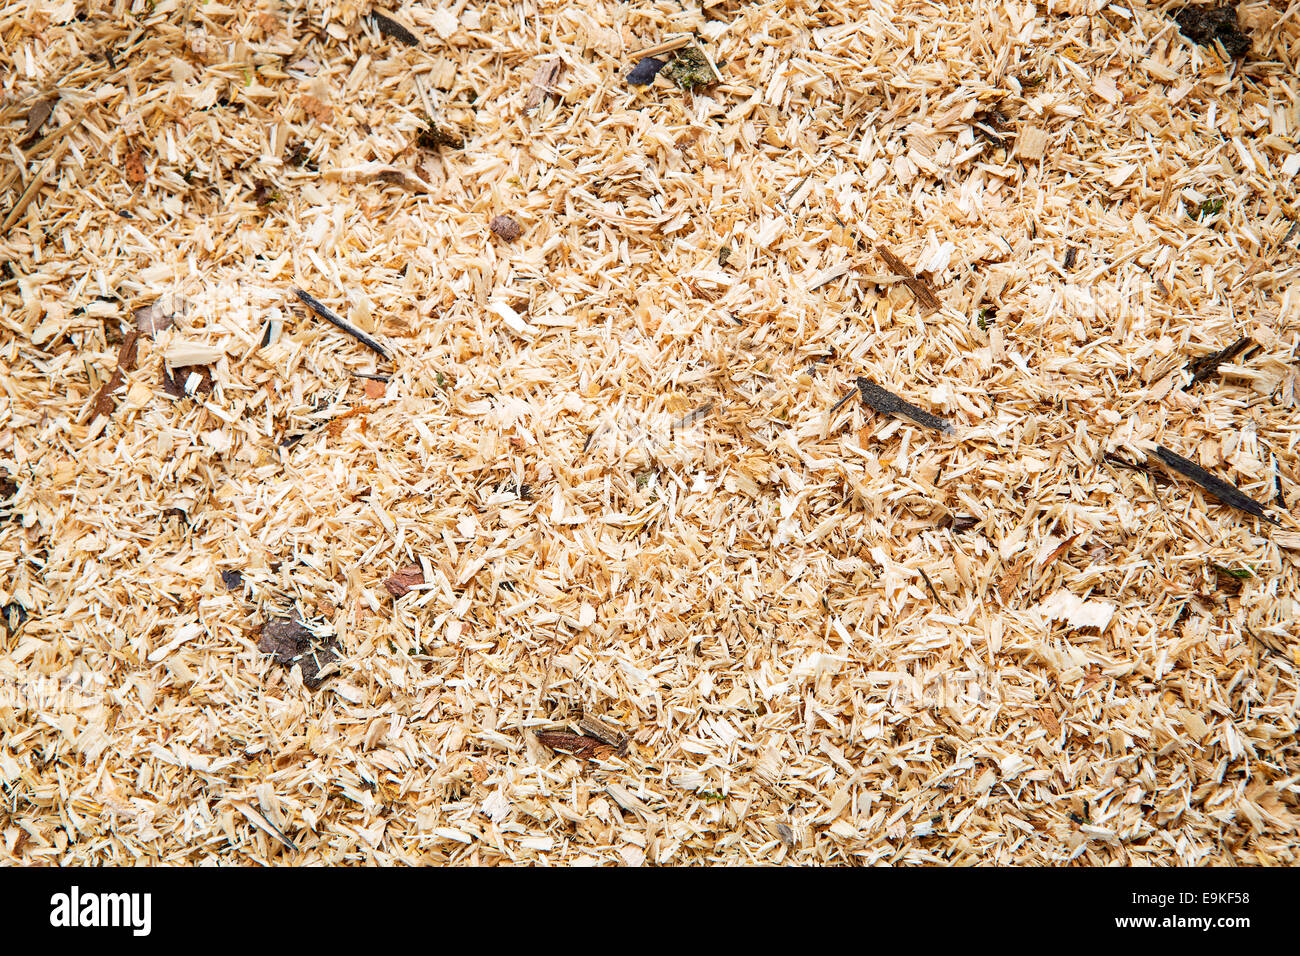 Closeup of sawdust as a background Stock Photo